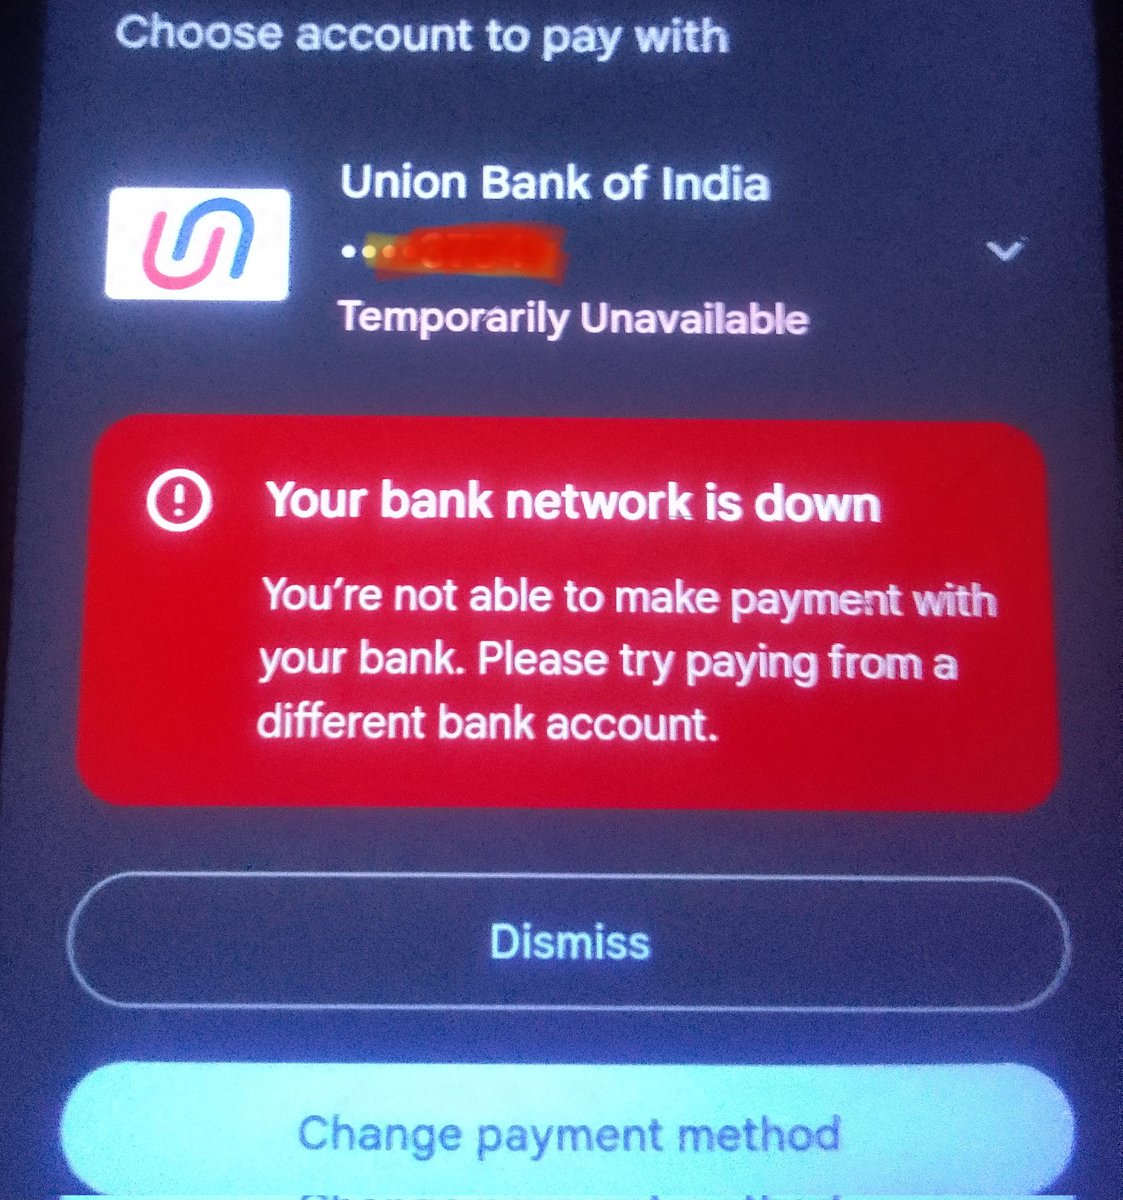 Why is this happening again & again?? Did anything serious take place with your banking services?  @UnionBankTweets @RBI 
#UnionbankofIndia